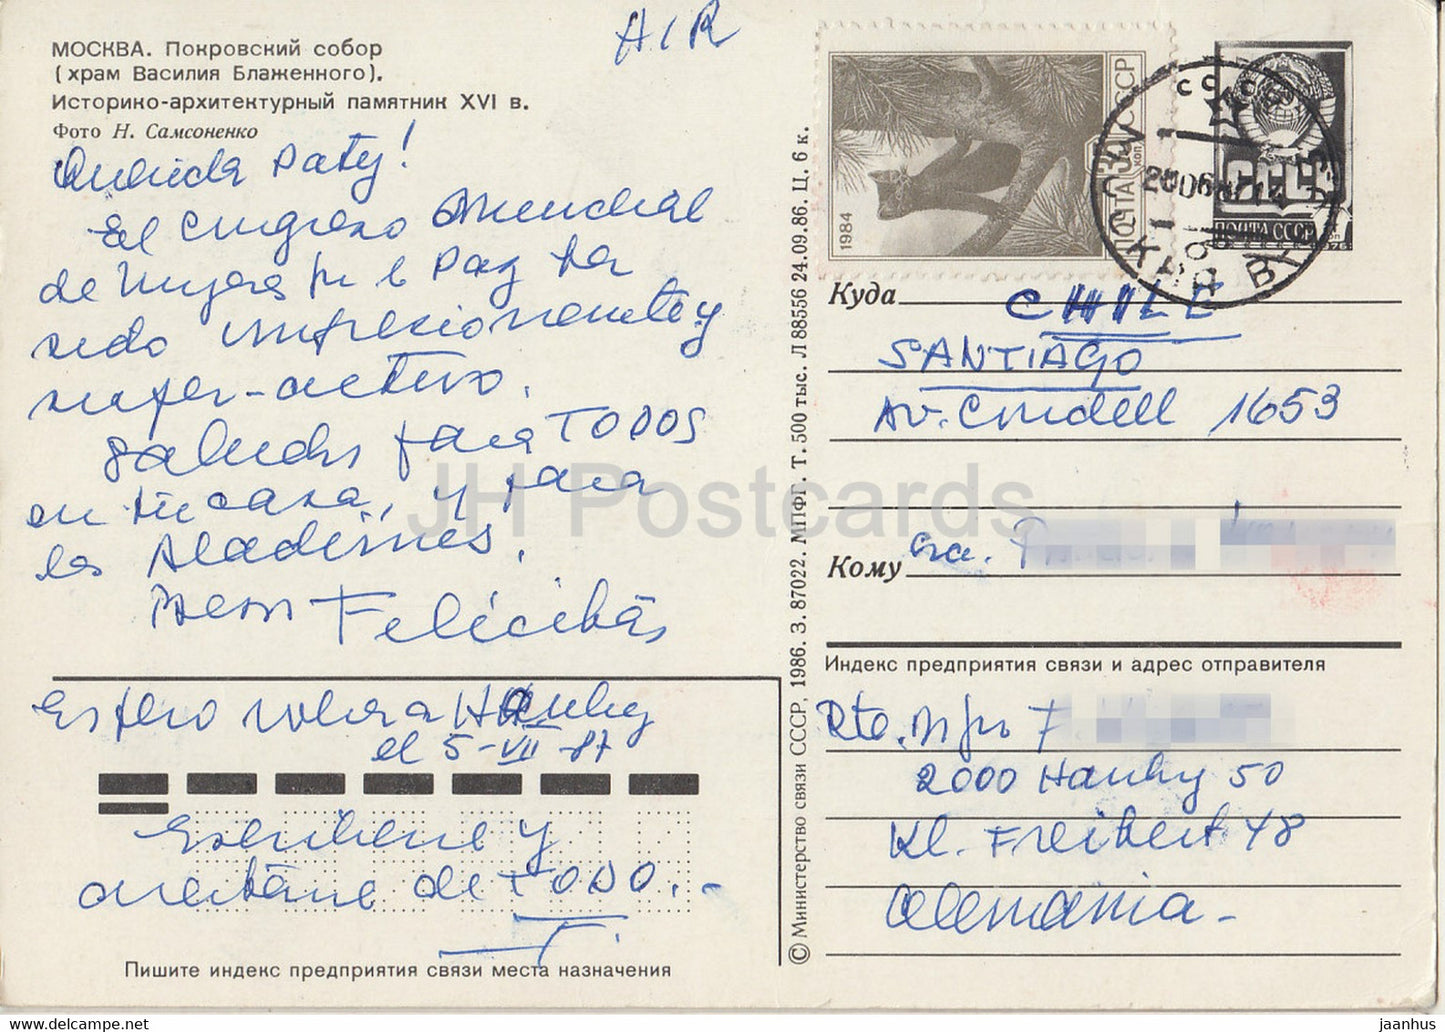 Moscow - Pokrovsky Cathedral - St. Basil's Cathedral - car Volga - 2 - postal stationery - 1986 - Russia USSR - used